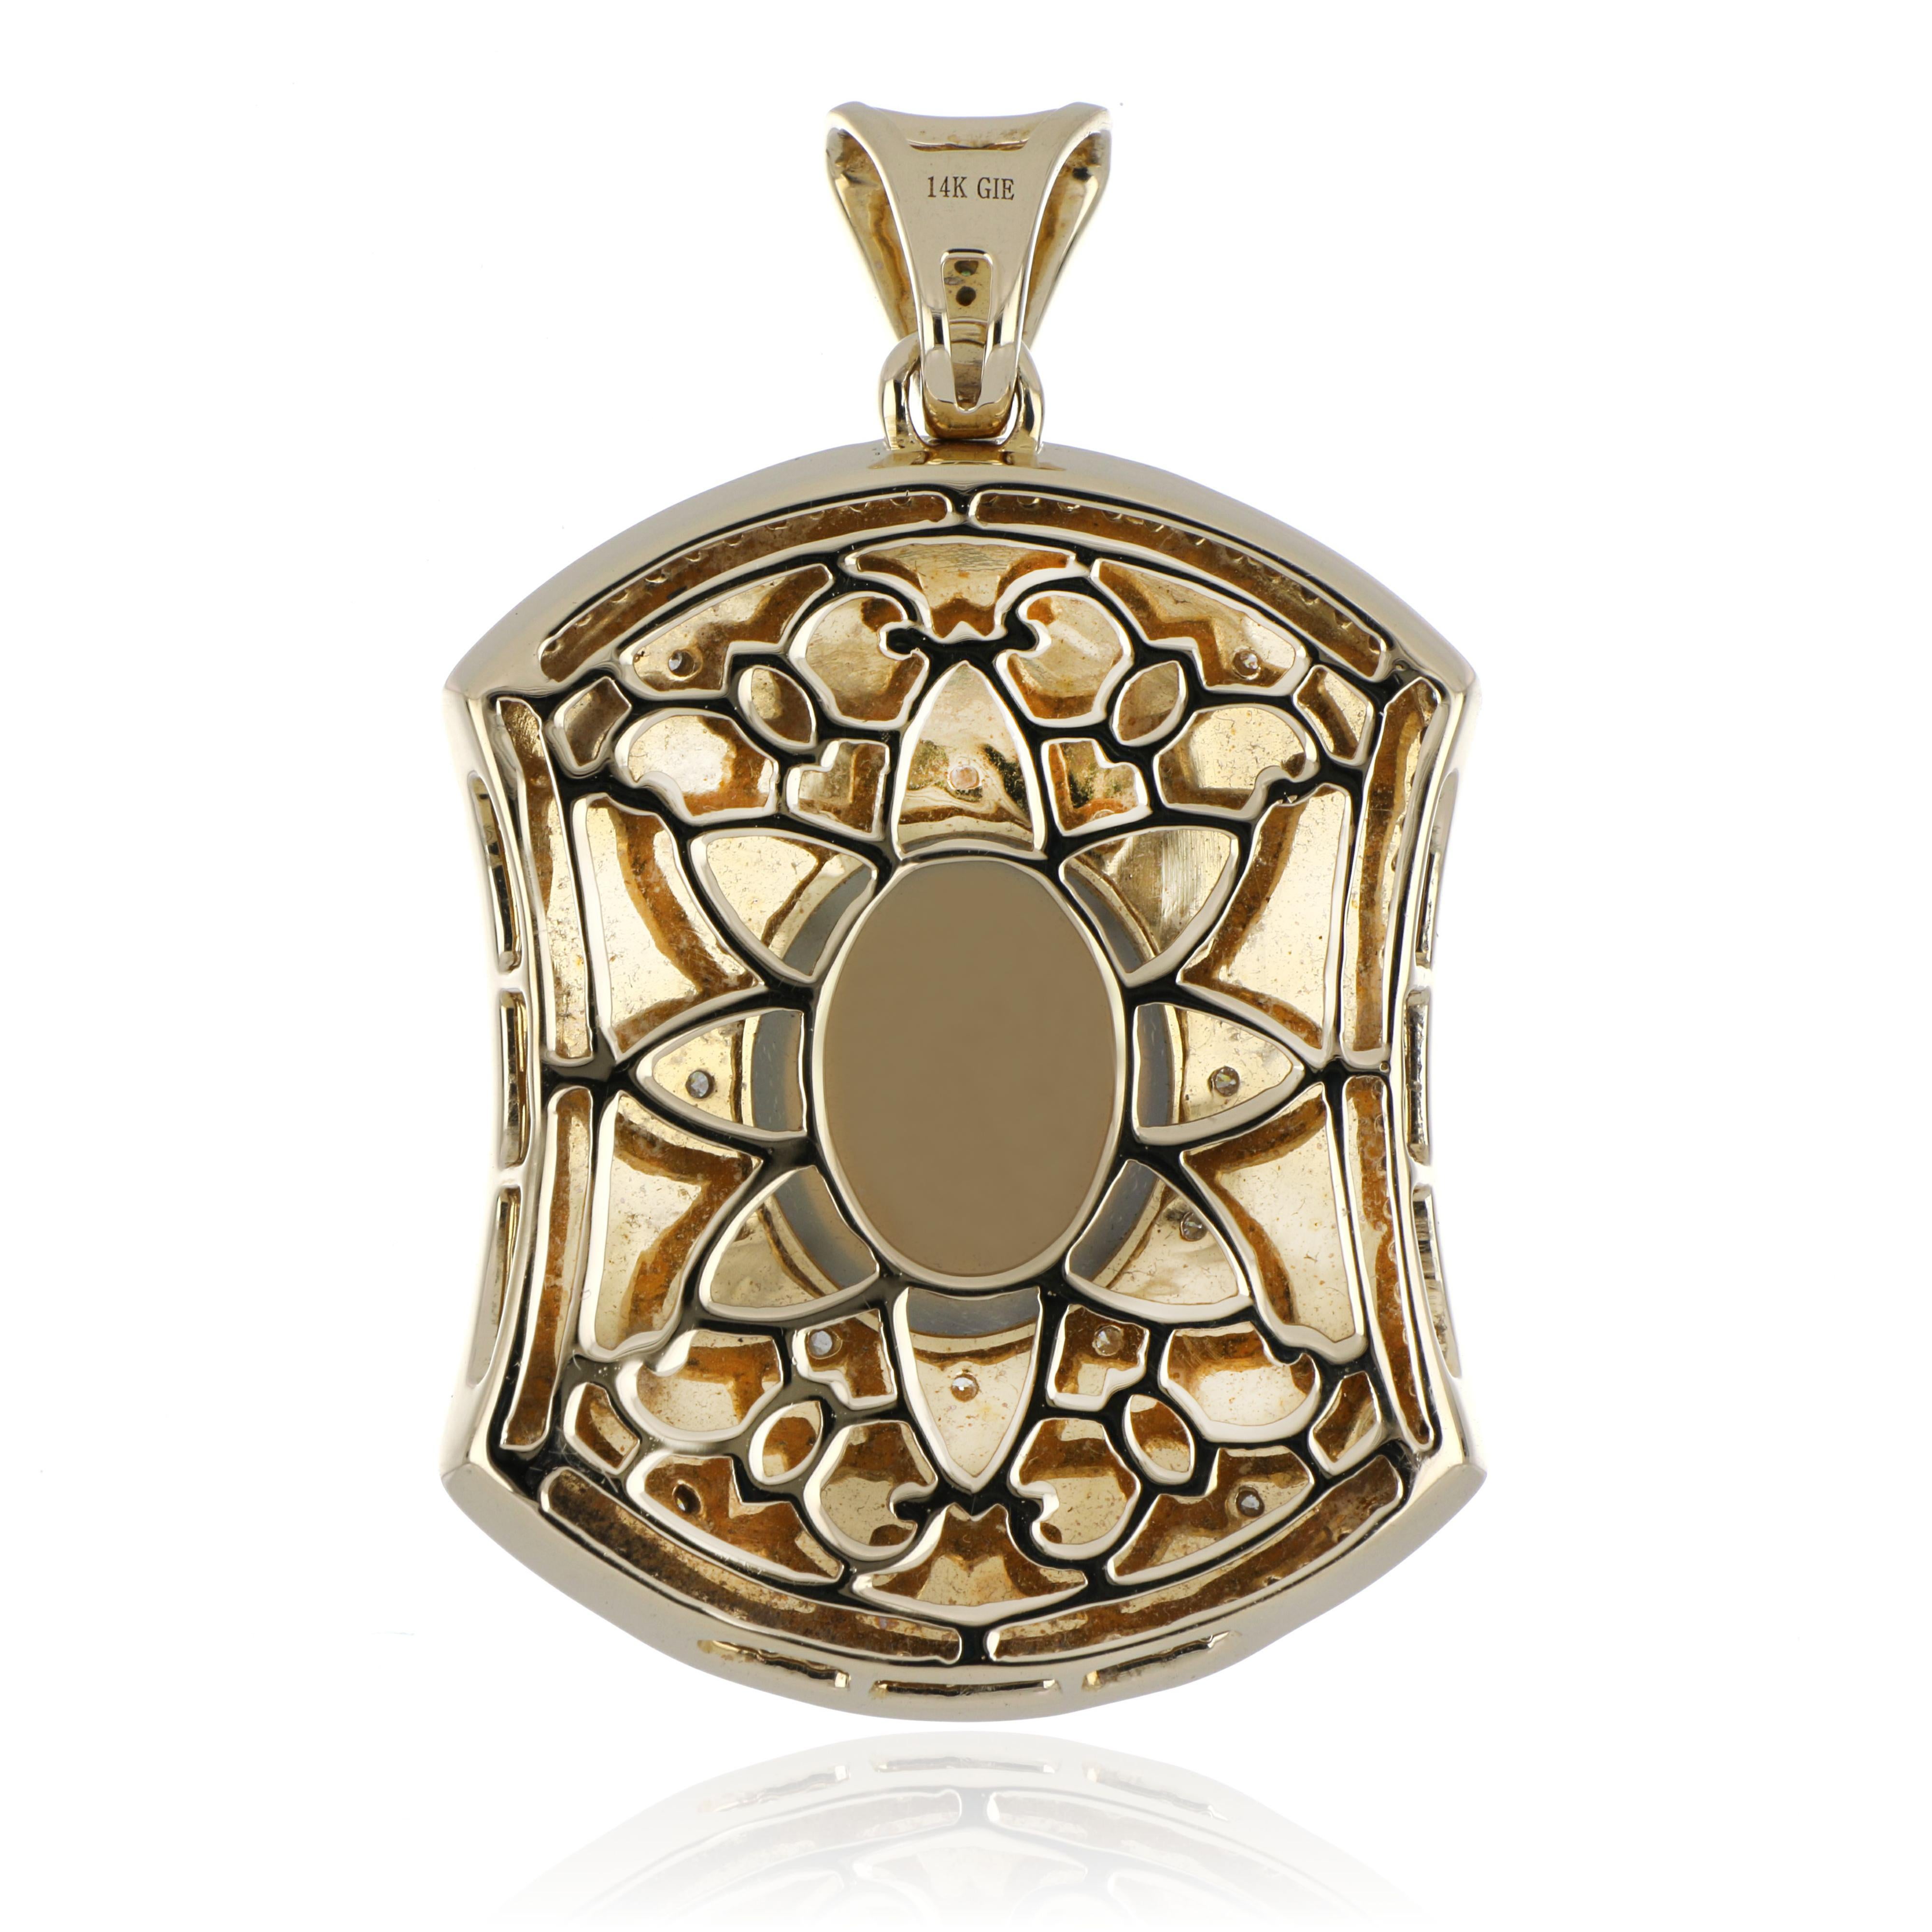 Elegant and exquisite Enamel Cocktail 14 K Pendant center set with 4.20 Cts. Cabochon Cut Grey Chalcedony Oval . Surrounded with Diamonds, weighing approx. 0.15 Cts. And accented with 0.34 Cts Tsavorite Beautifully Hand crafted in 14 Karat Yellow